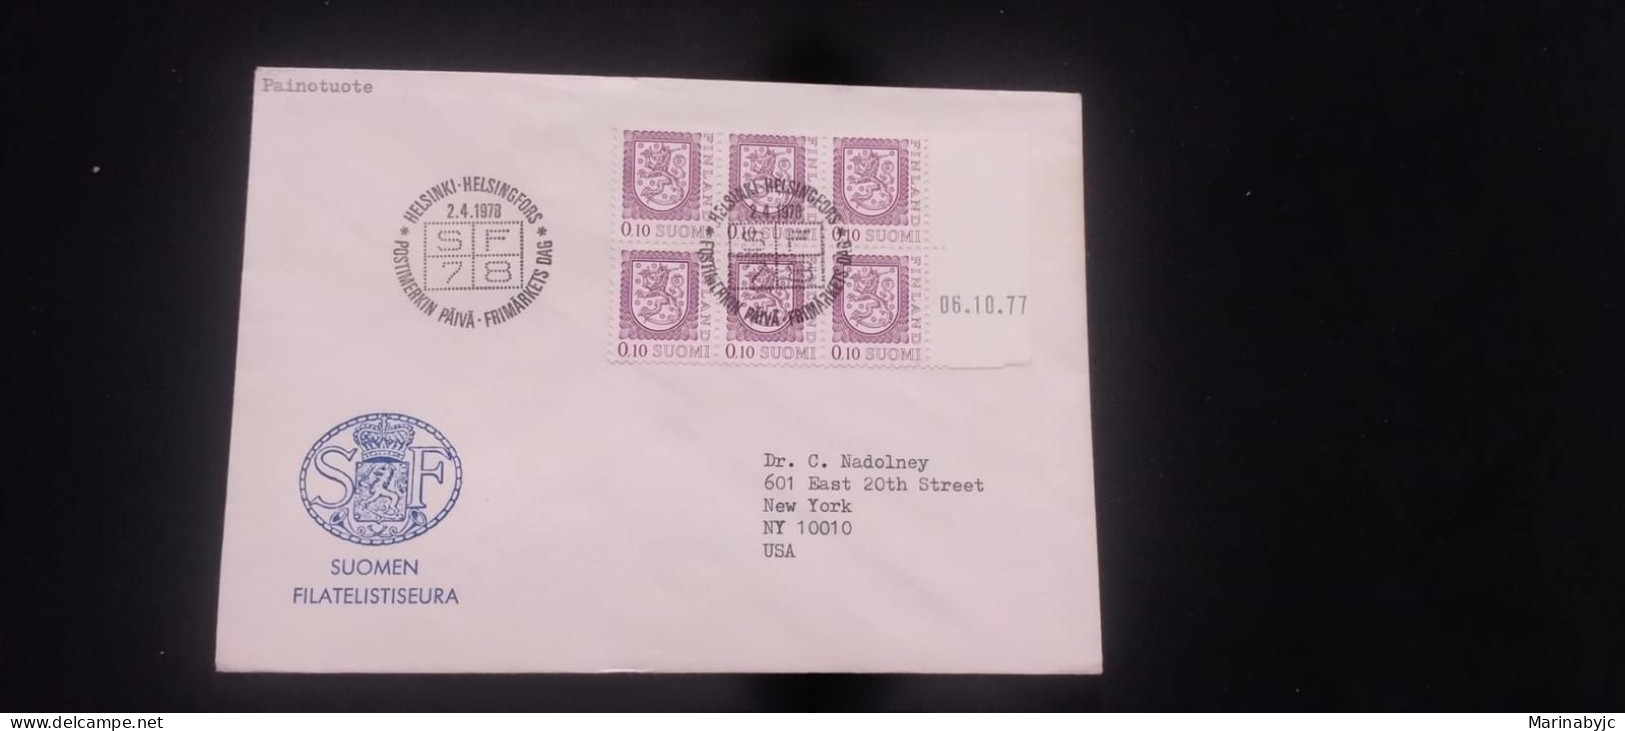 C) 1978. FINLAND. AIRMAIL ENVELOPE SENT TO USA. MULTIPLE STAMPS. XF - Europe (Other)